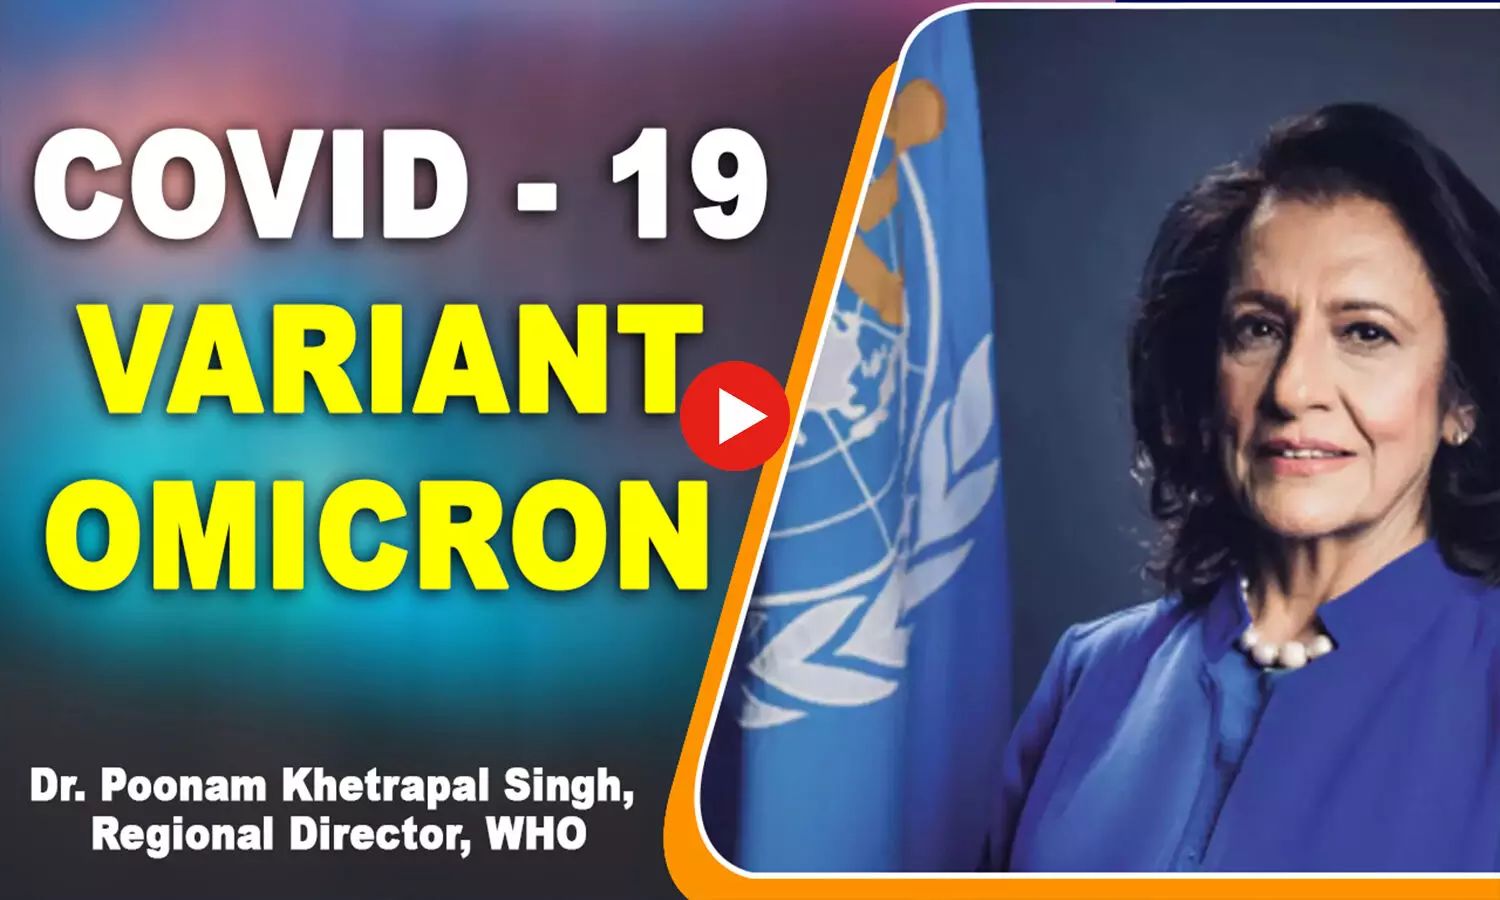 Dr Poonam Khetrapal Singh, Regional Director, WHO - COVID 19 variant Omicron